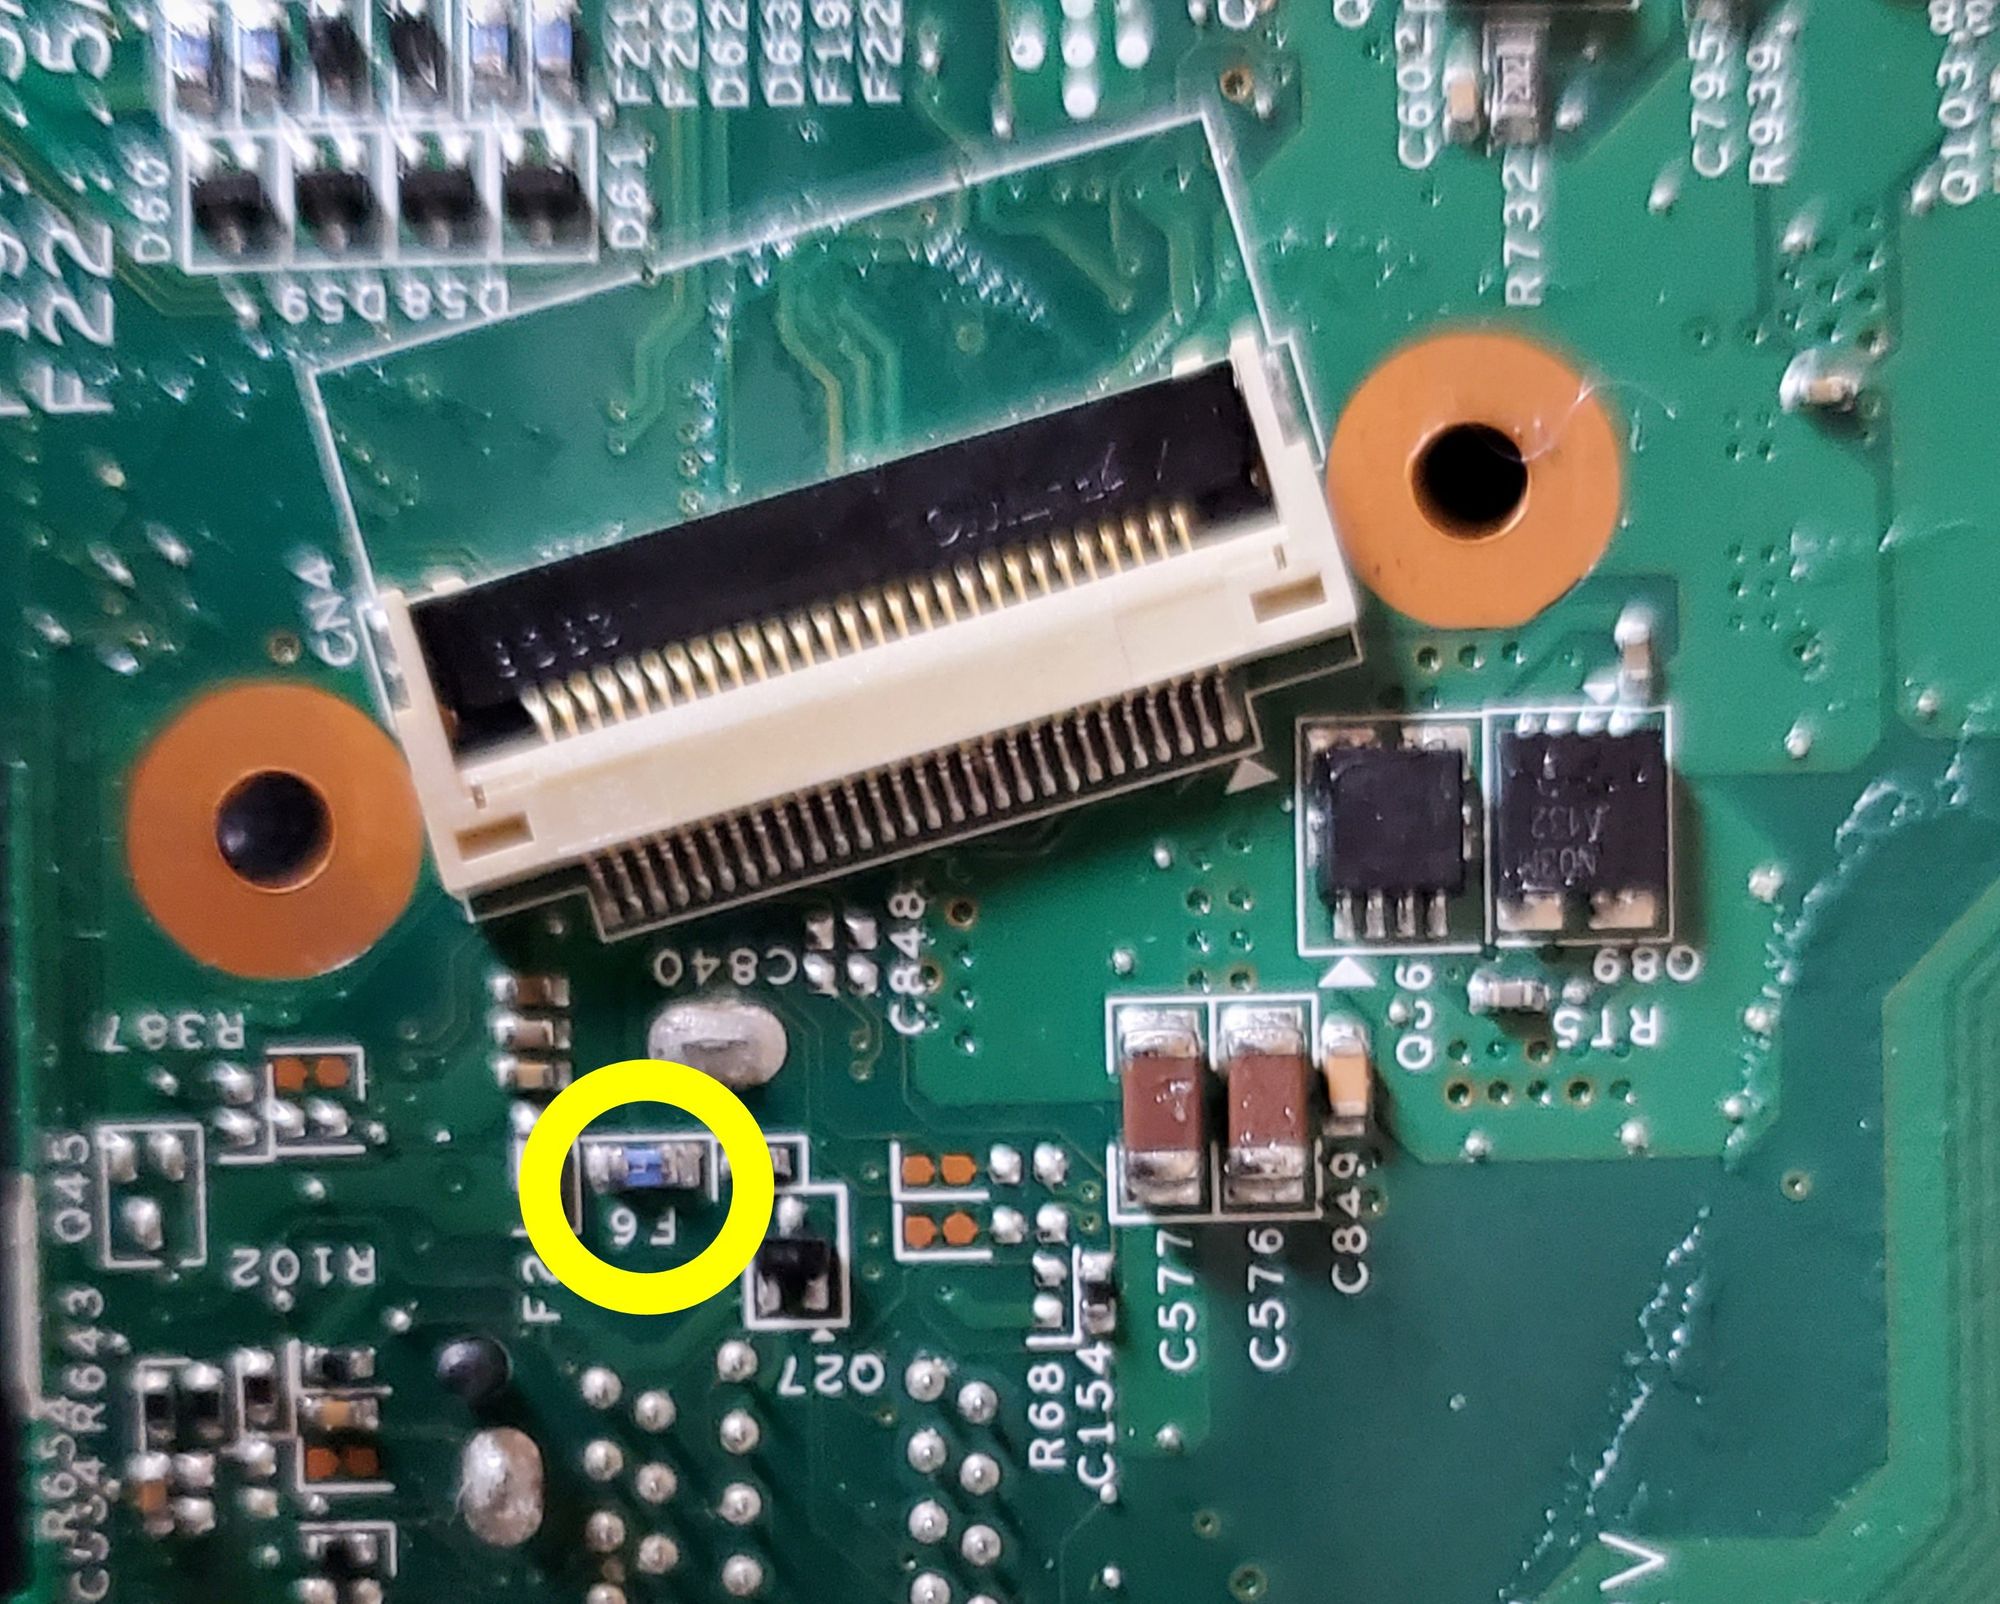 Location of fuse (yellow circle) on motherboard